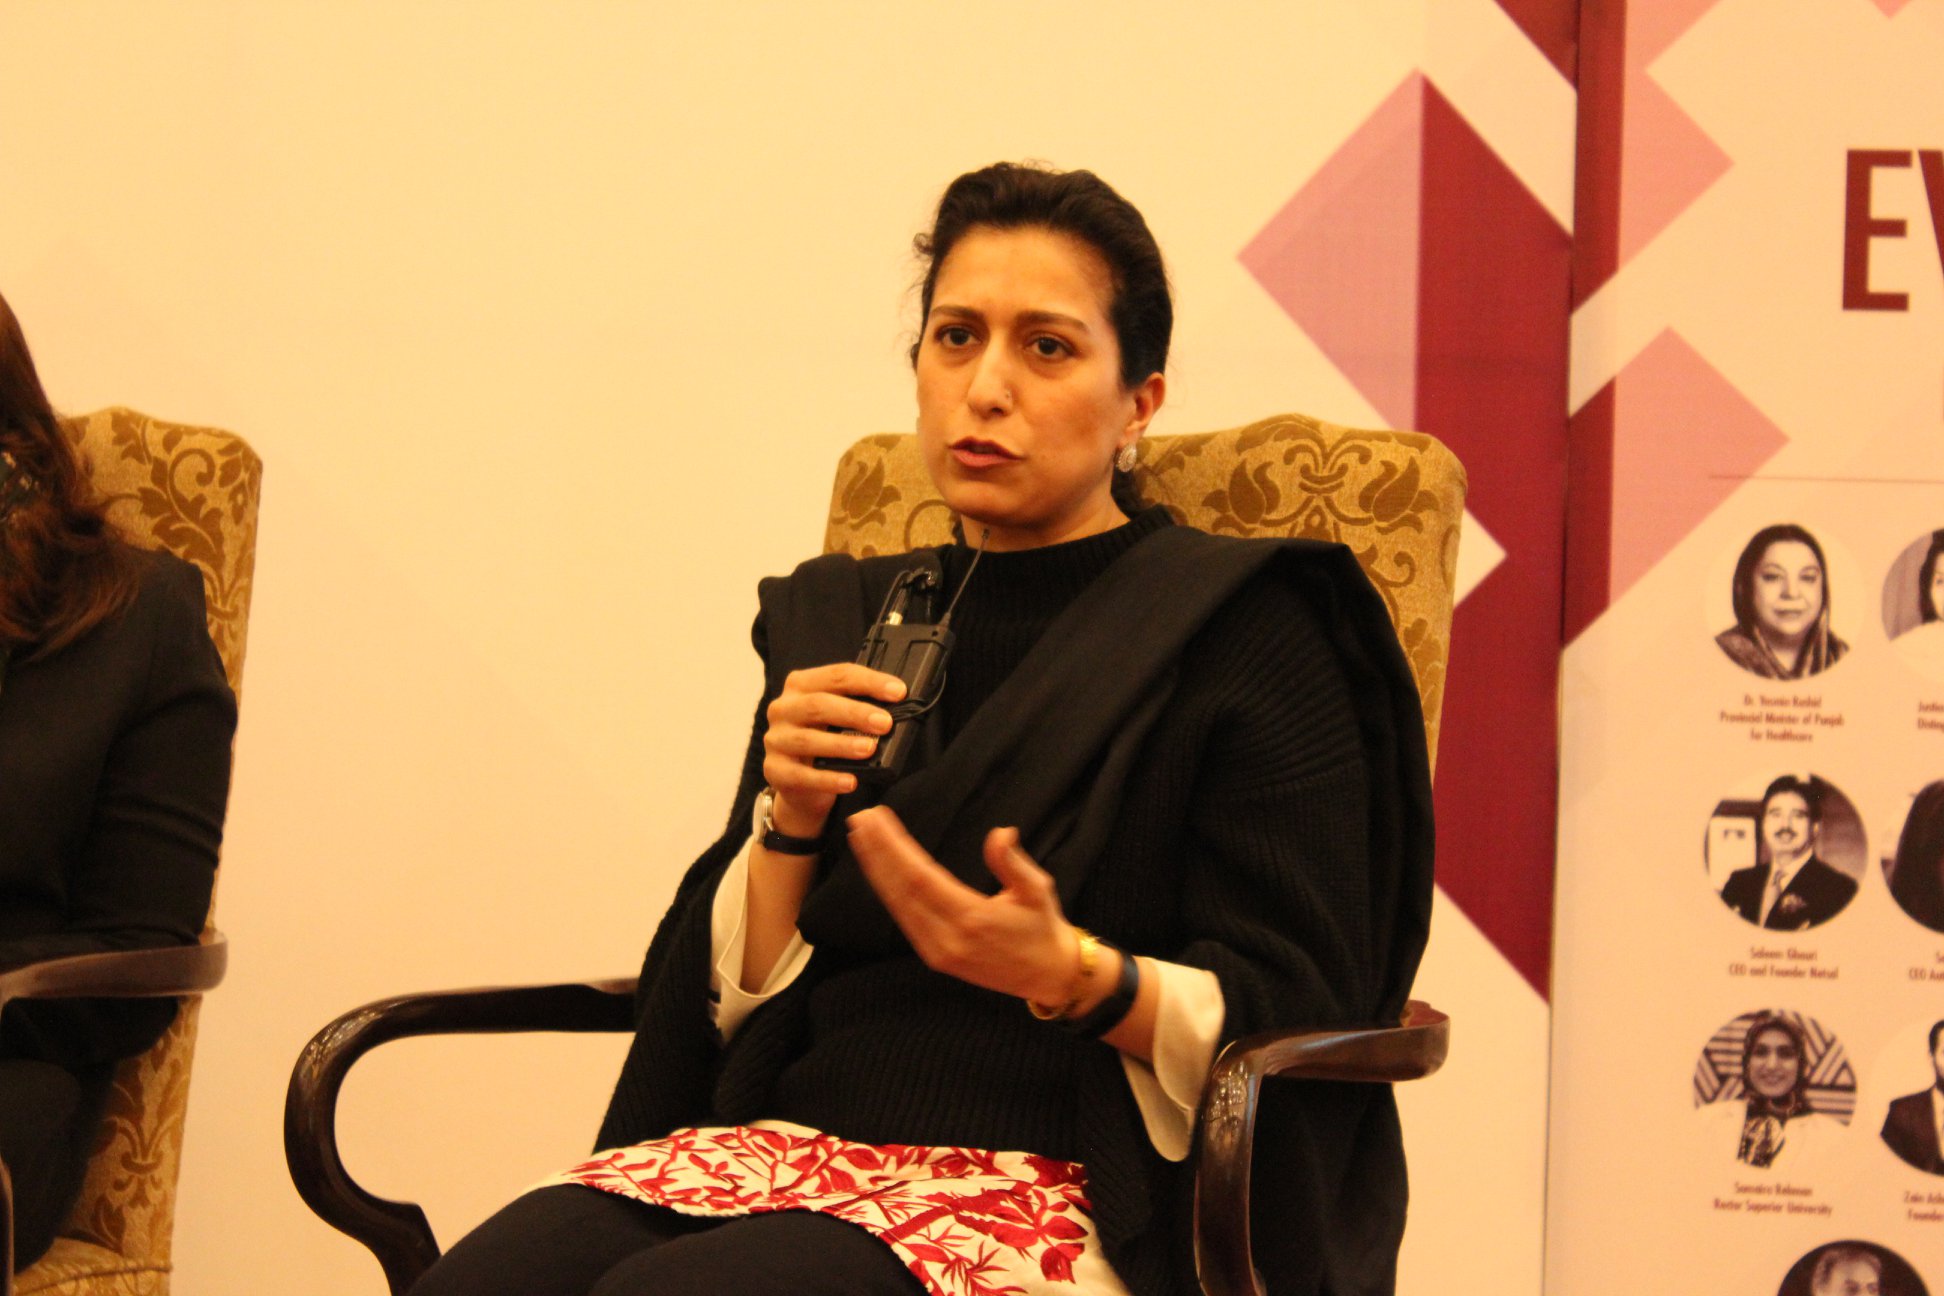 Dr. Mariam Chughtai Views On the Importance for Girls to Find Their Identity and Development